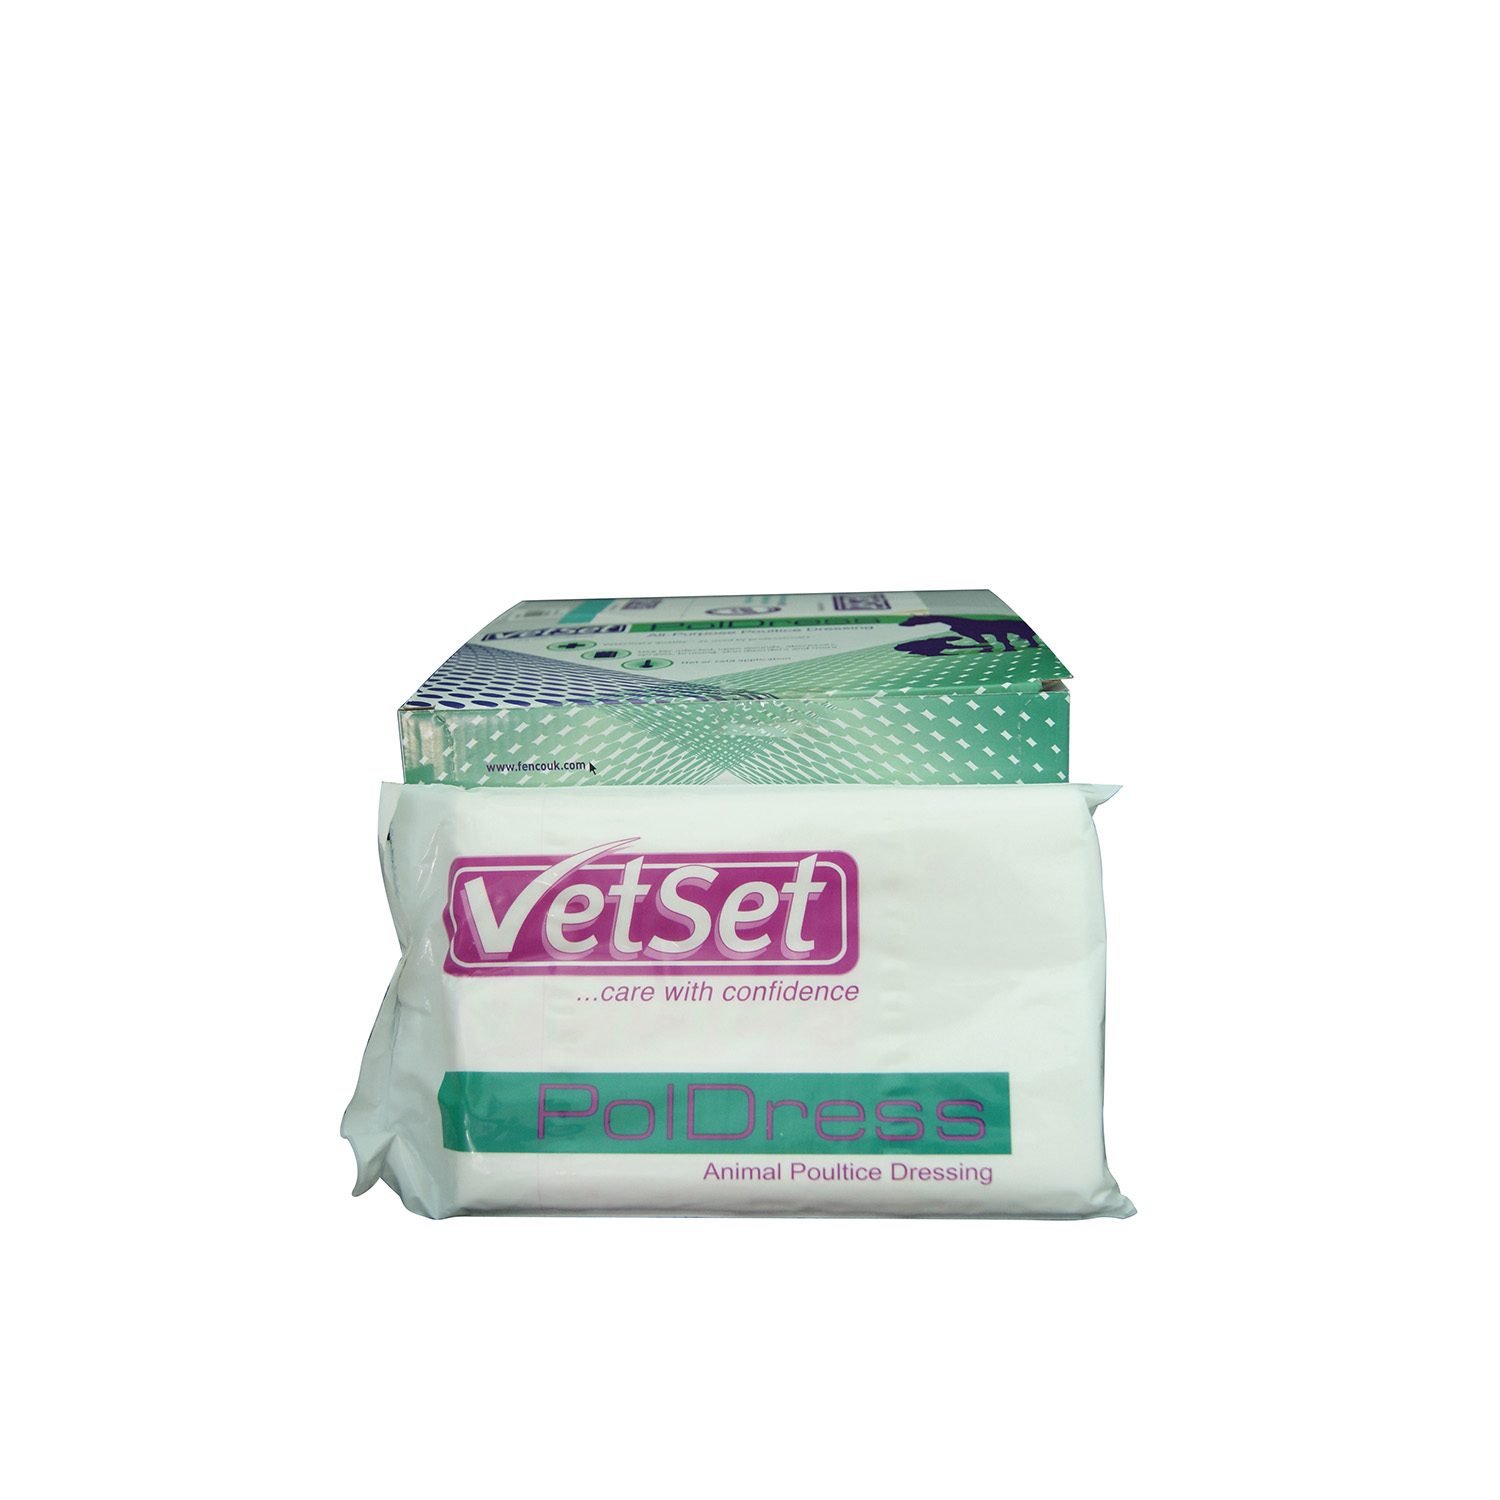 VETSET POLDRESS POULTICE 10 PACK 10 PACK